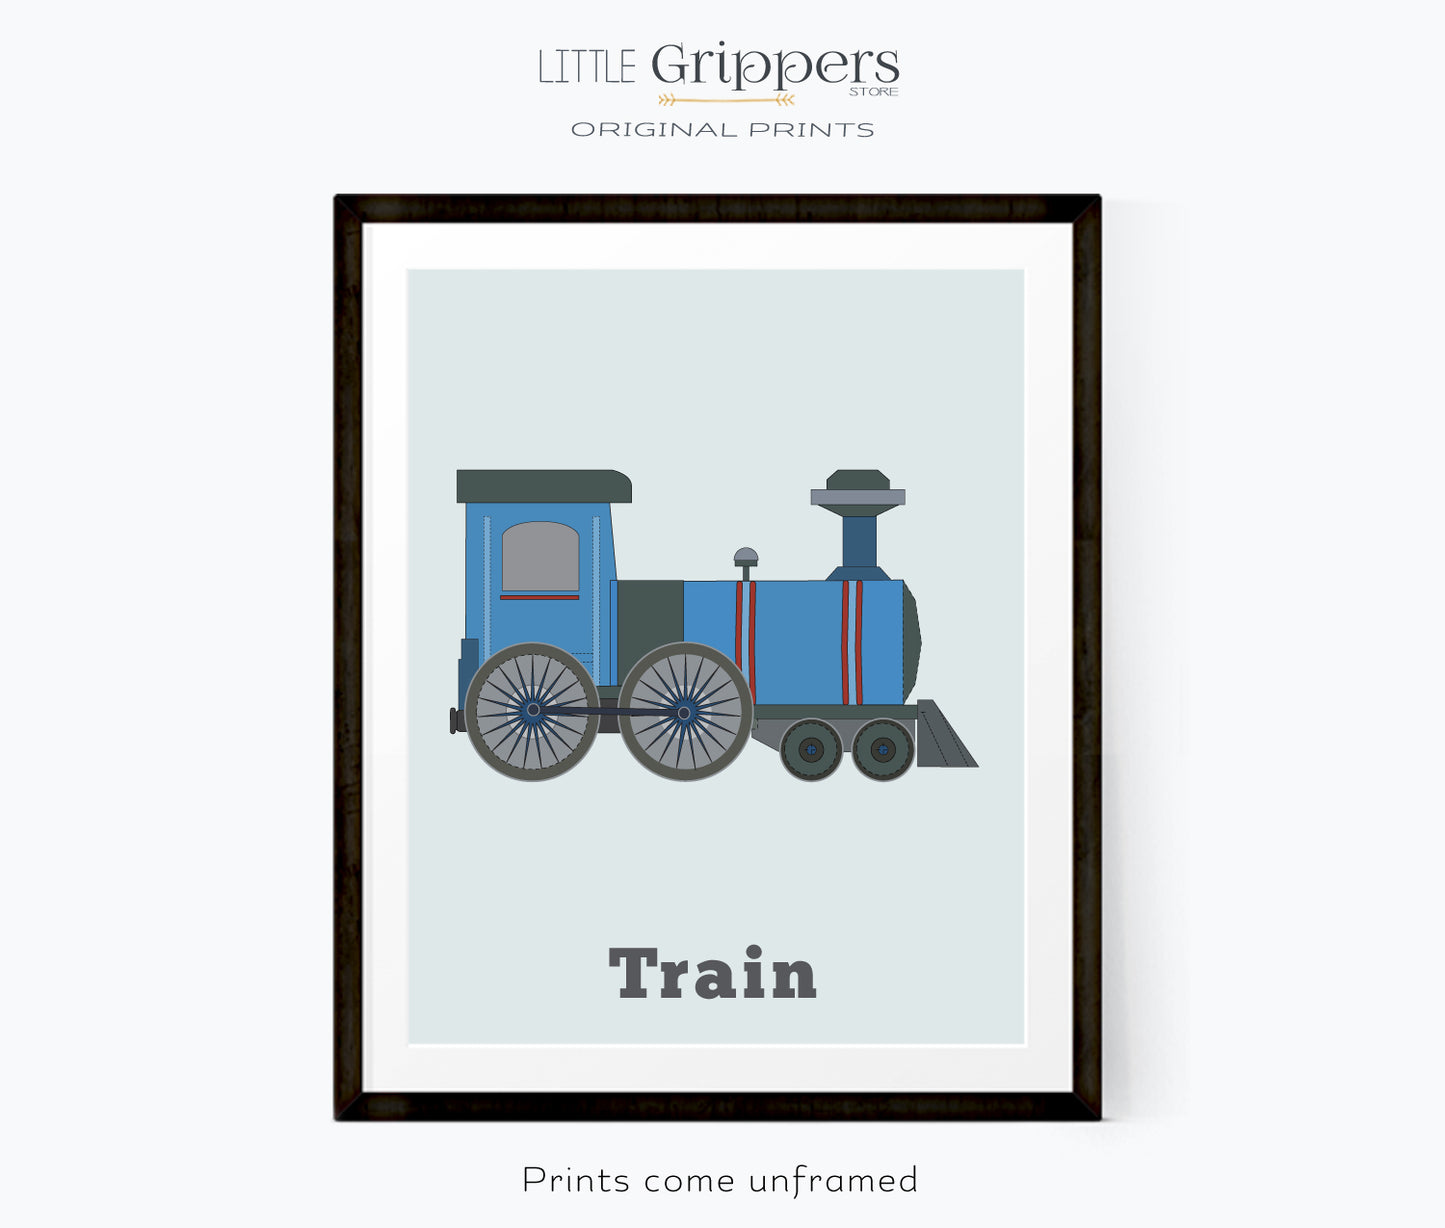 Vehicle Print set of two, Tractor and Train